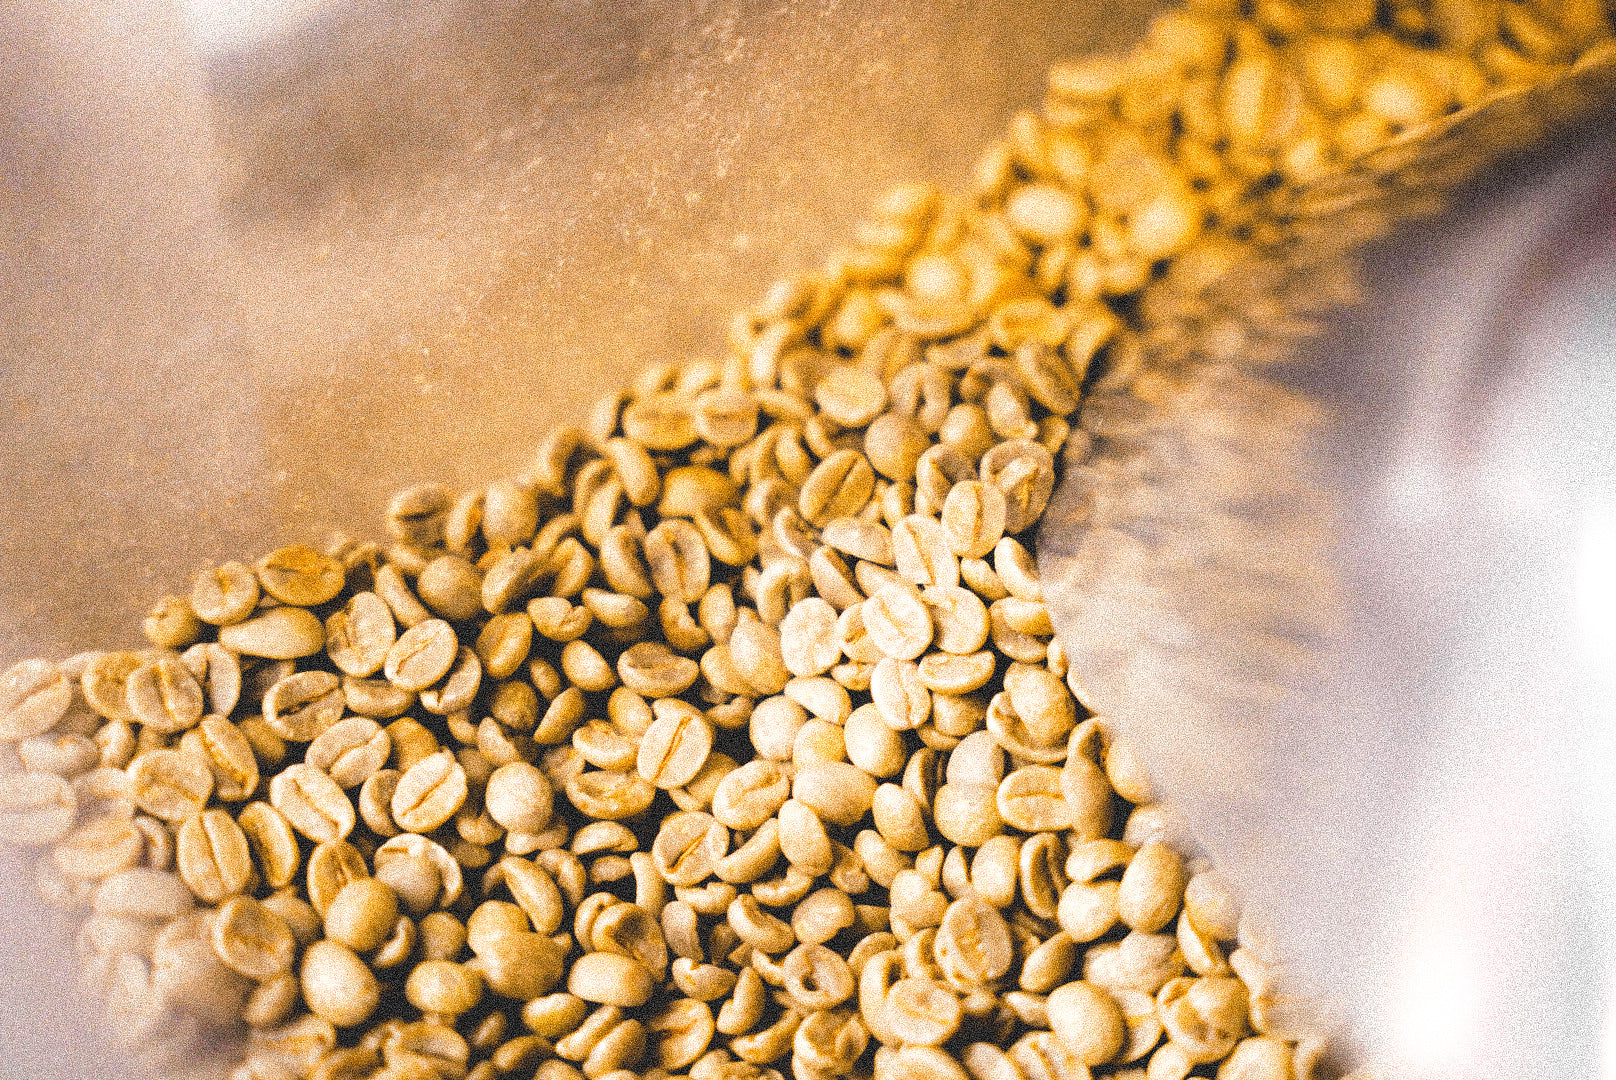 A captivating image featuring hands scooping raw coffee beans in preparation for roasting. The raw coffee beans spill from the scoop, showcasing the organic and earthy textures. This closeup captures the anticipation and craftsmanship involved in the initial stages of the coffee roasting process, inviting viewers to appreciate the journey from raw beans to aromatic, freshly roasted coffee.